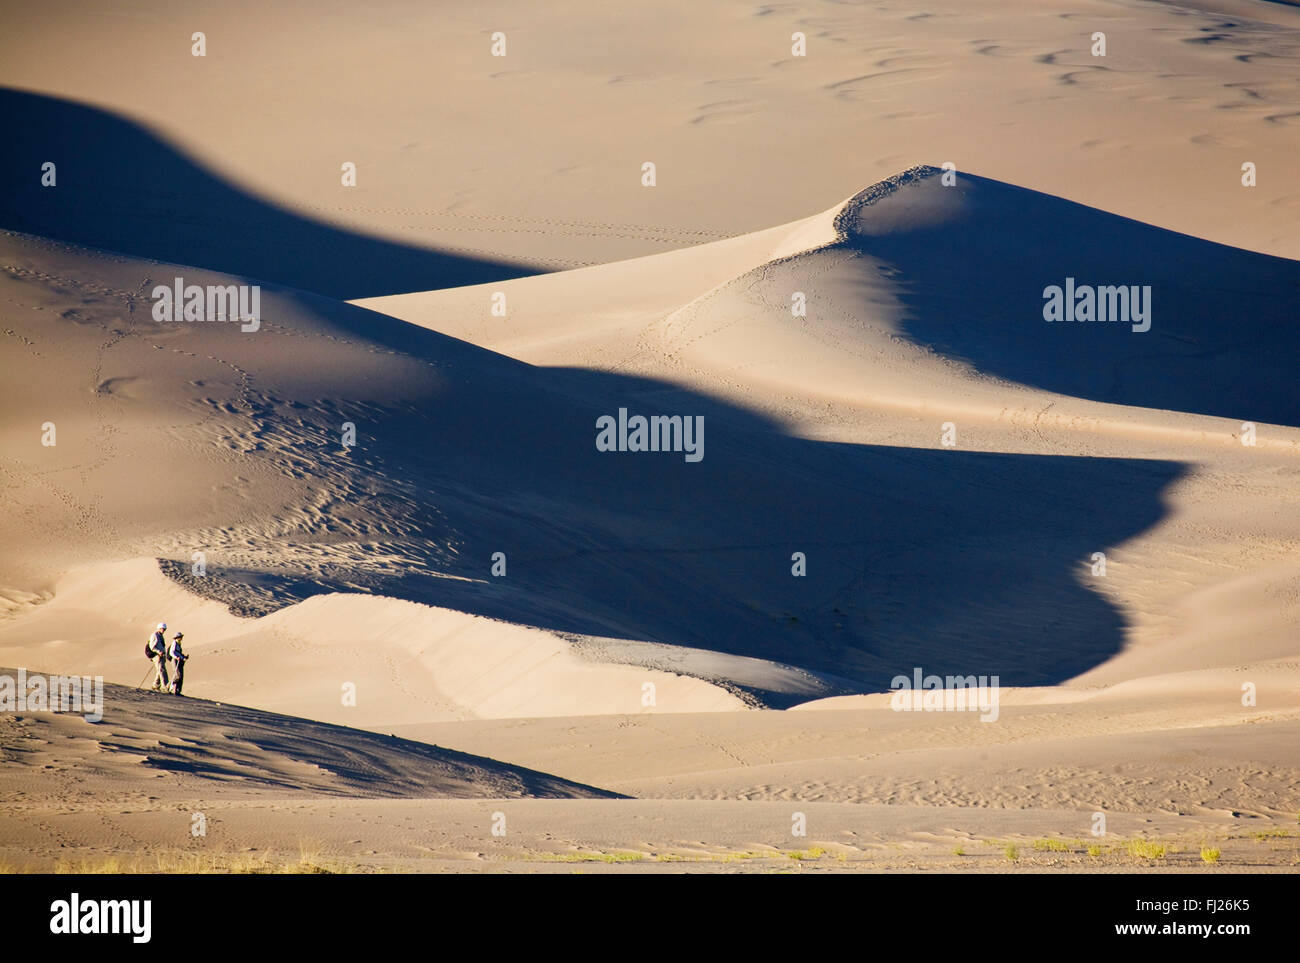 A couple hikes across the dunes in Great Sand Dunes National Park, Colorado. Stock Photo